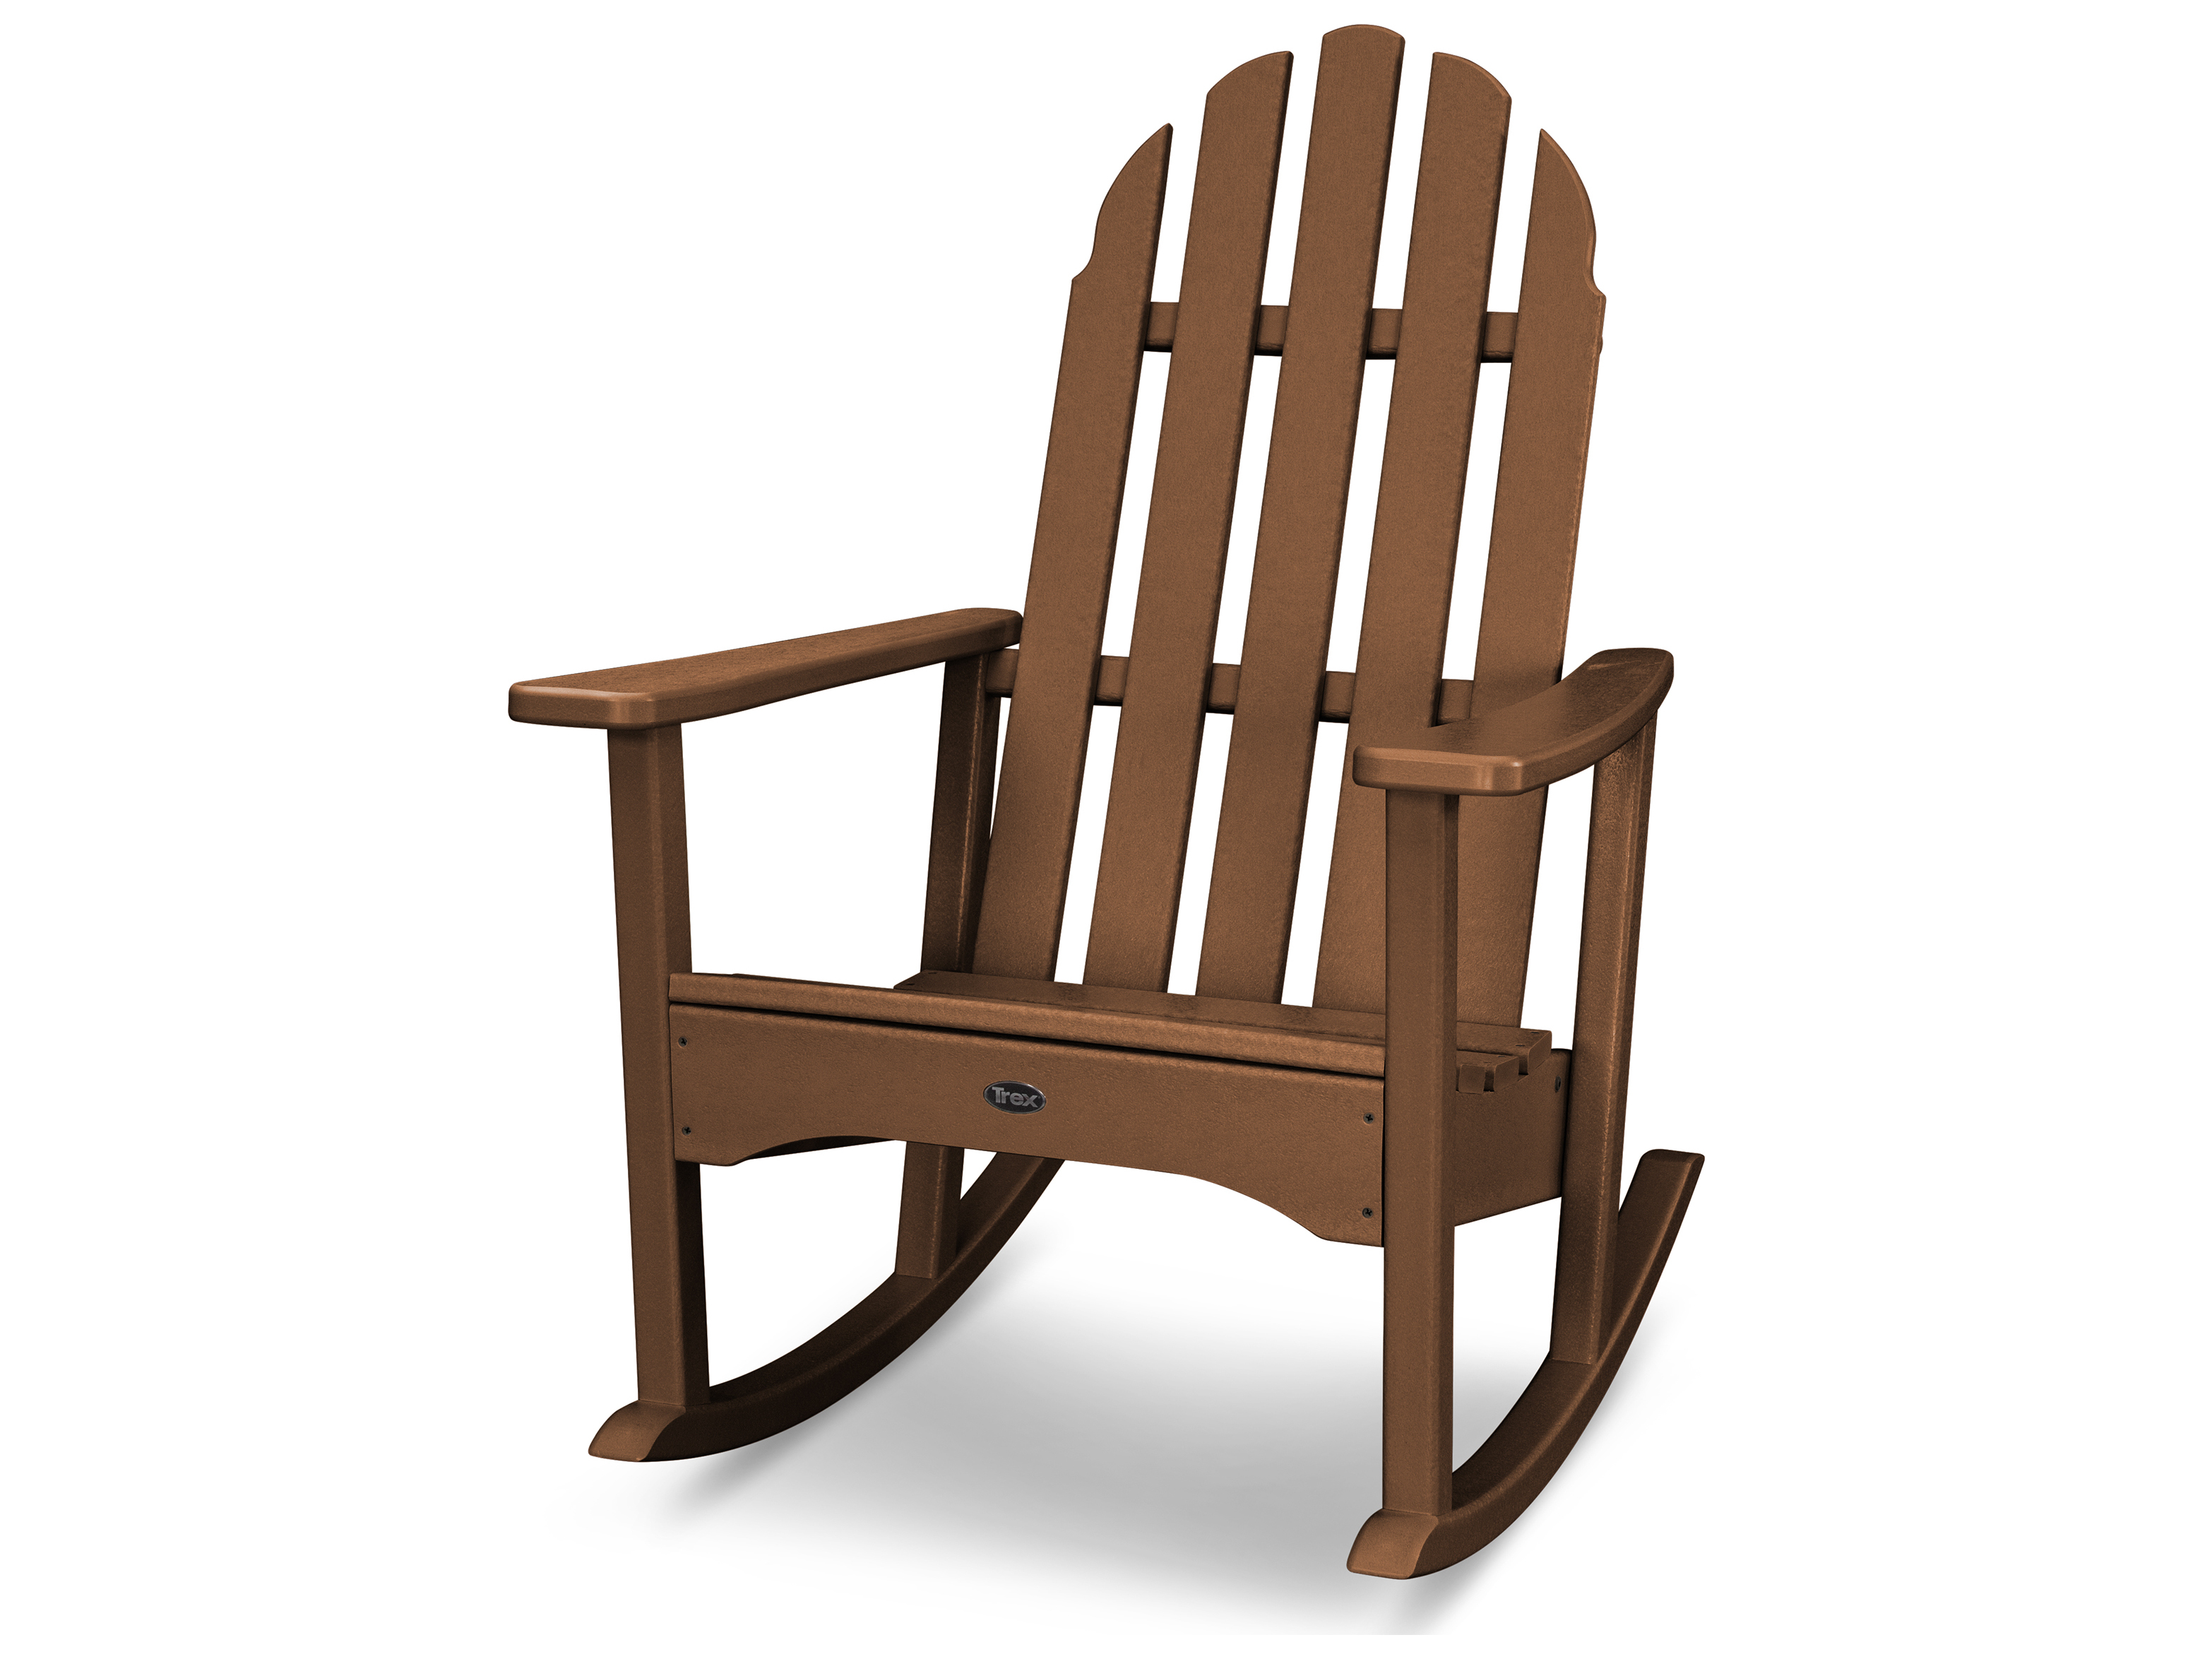 Adirondack Chairs Out Of Trex | Adirondack Chair